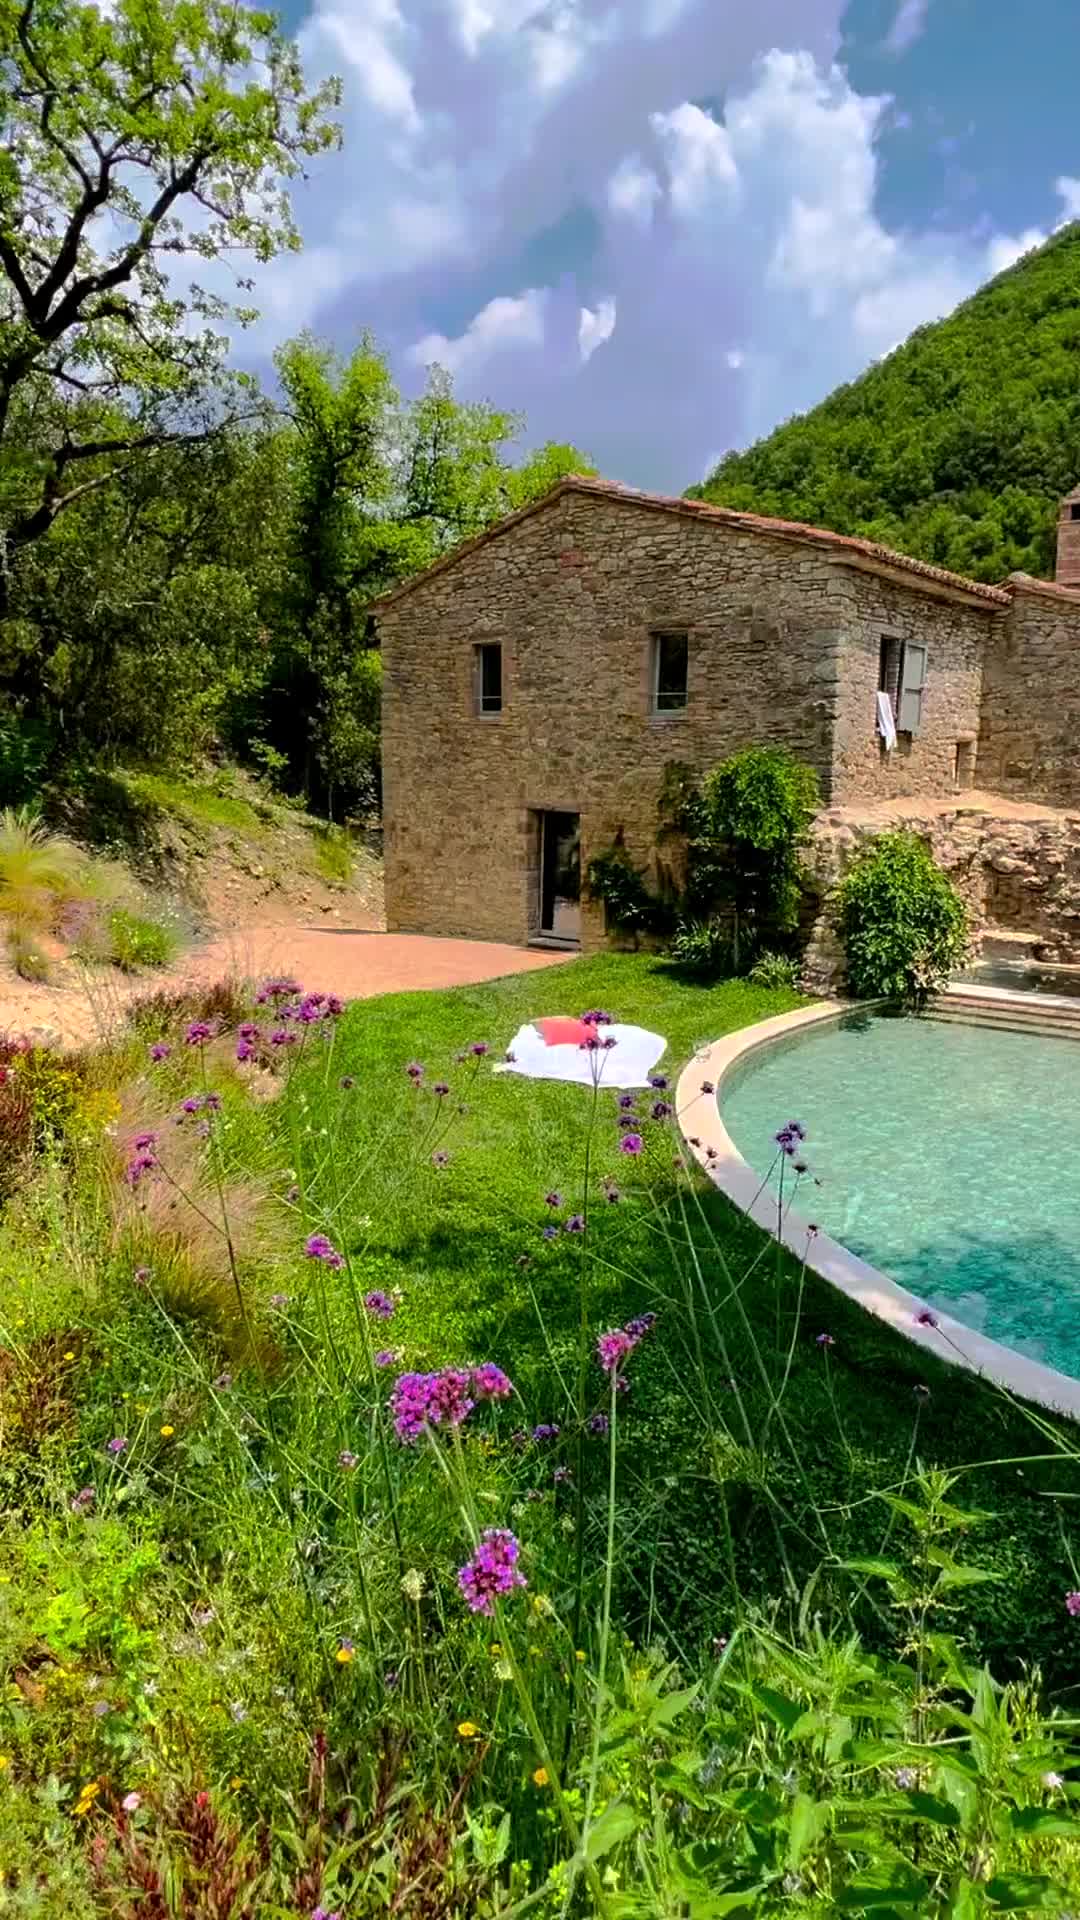 Surrounded by Beauty at Villa Molinella, Umbria